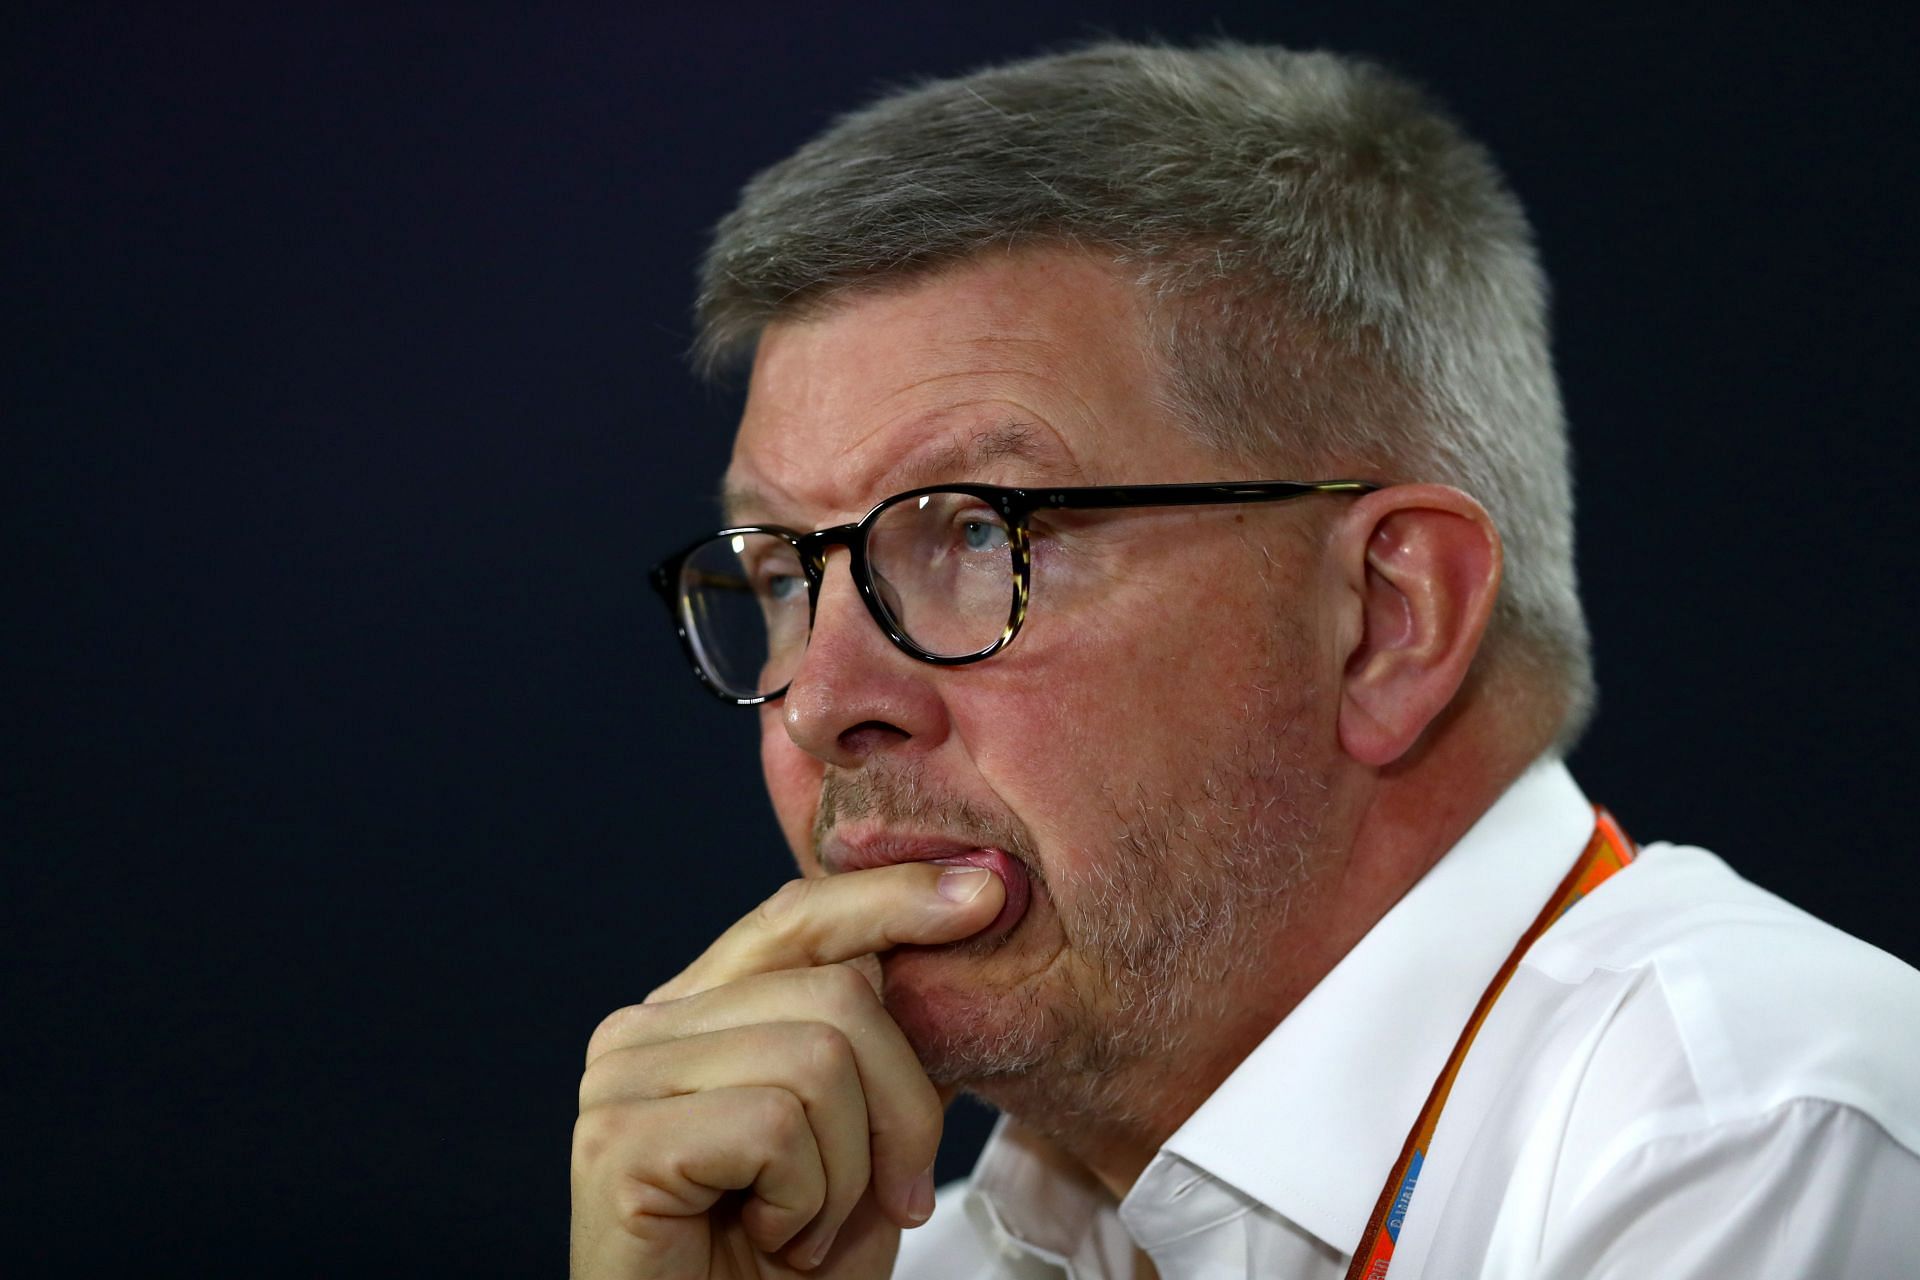 Ross Brawn, Managing Director (Sporting) of the Formula One Group. (Photo courtesy Getty Images)